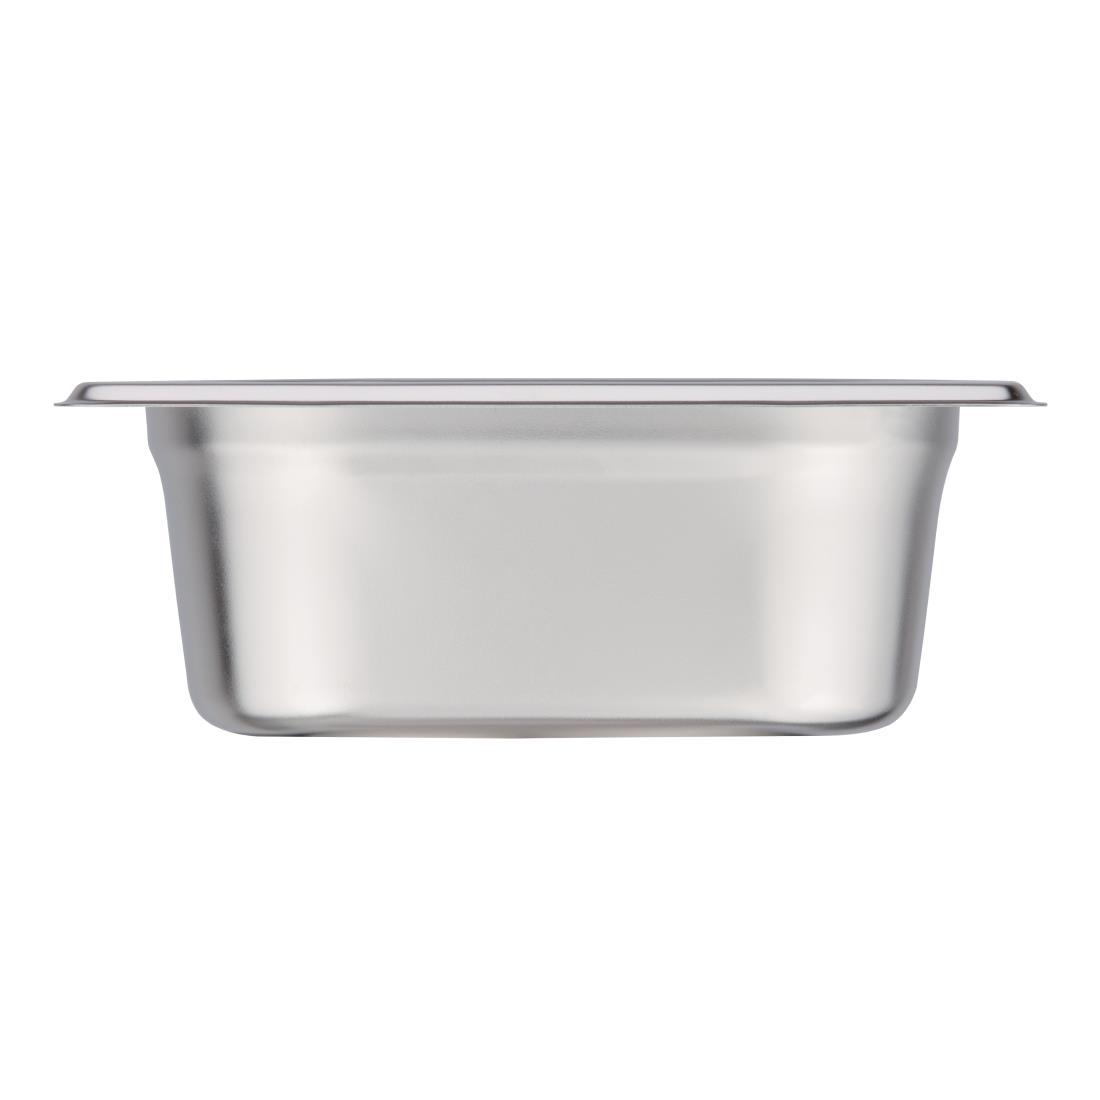 Vogue Stainless Steel 1/9 Gastronorm Pan 65mm - K824  - 5